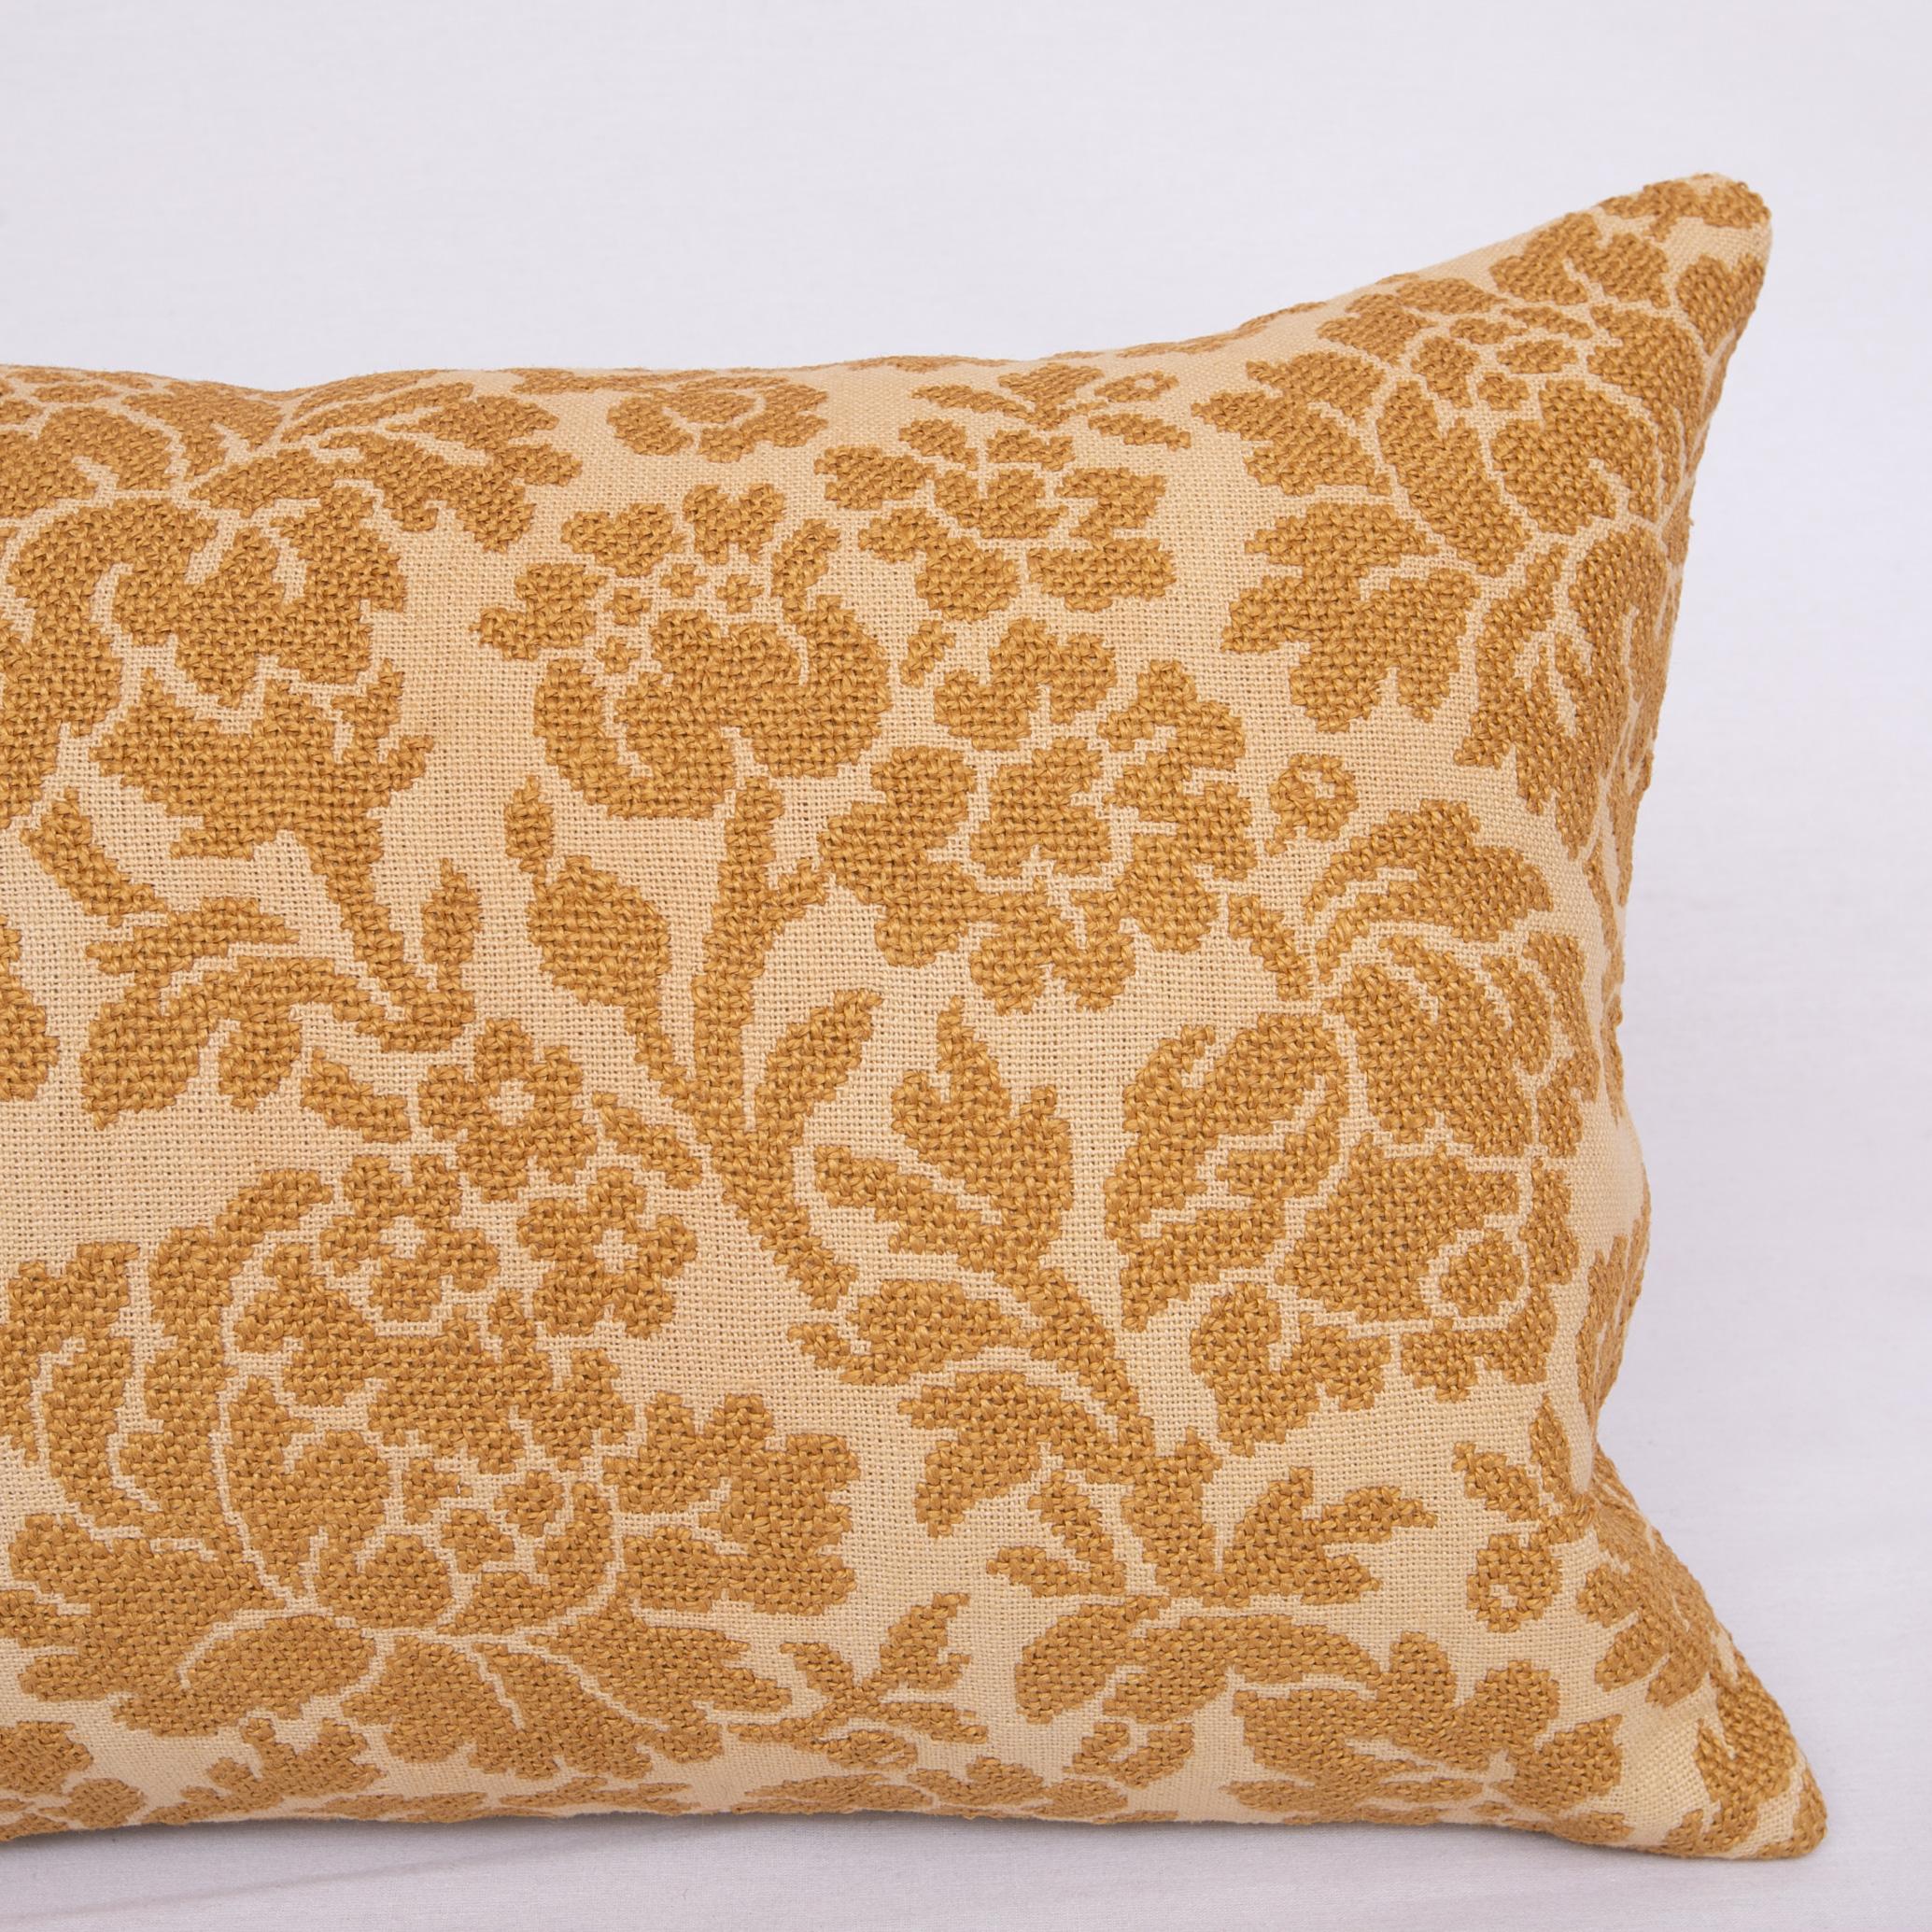 French Antique Pillowcase Made from an Early 20th C. European Embroidery